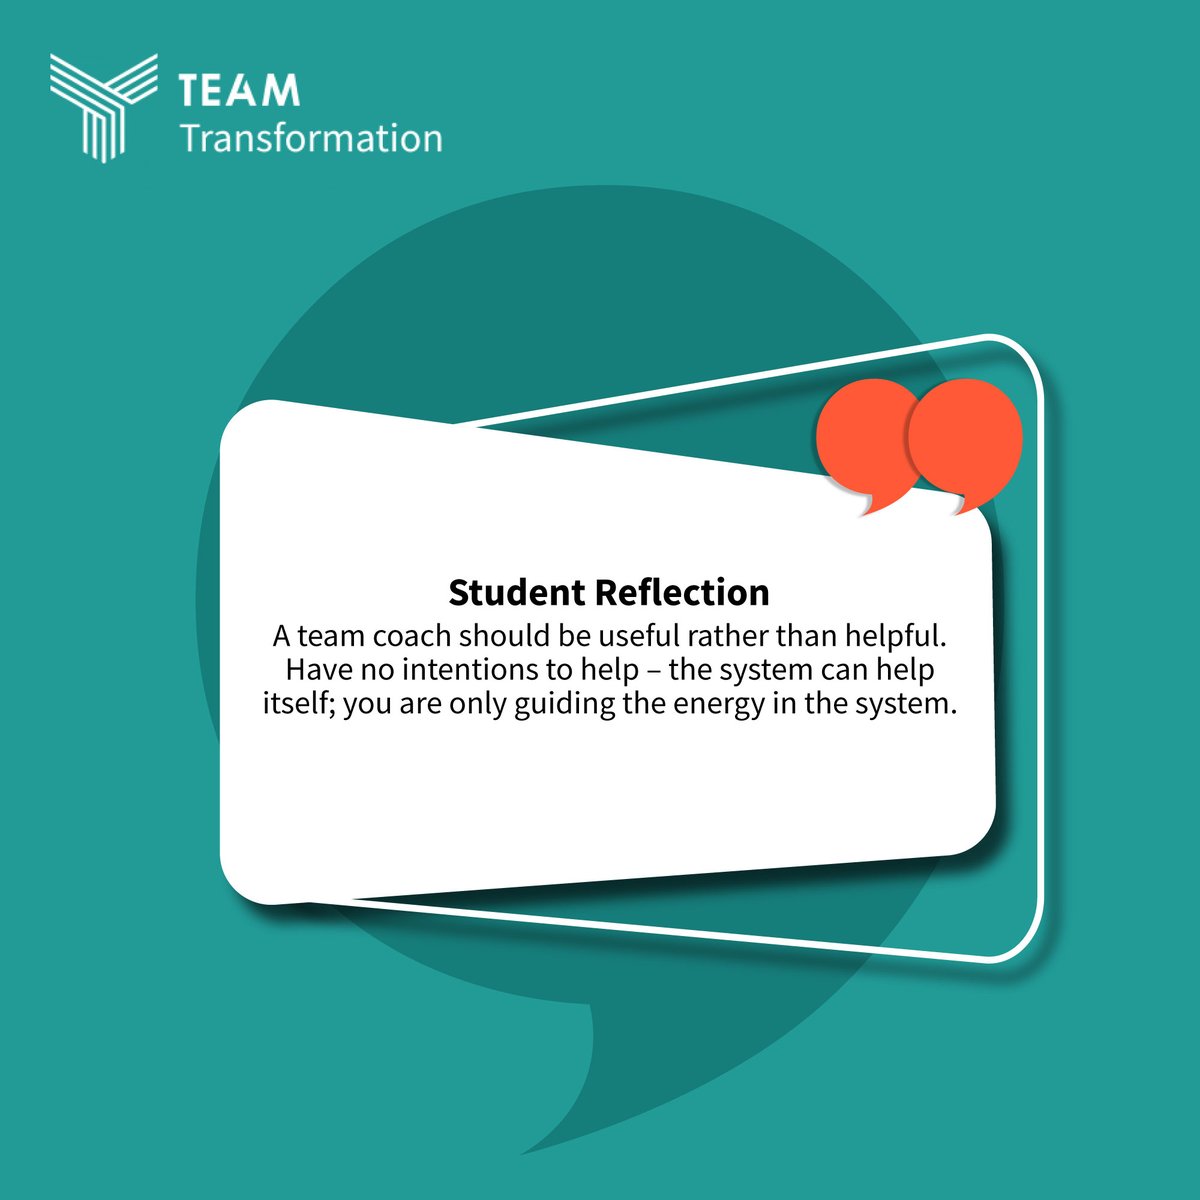 💪 Empower your team with the guidance they need to thrive. As a team coach, your role is to be useful, not just helpful. Guide the energy within the system to unlock its full potential. Let's redefine coaching together. 

#StudentReflection #TeamCoaching #EmpowerTeams